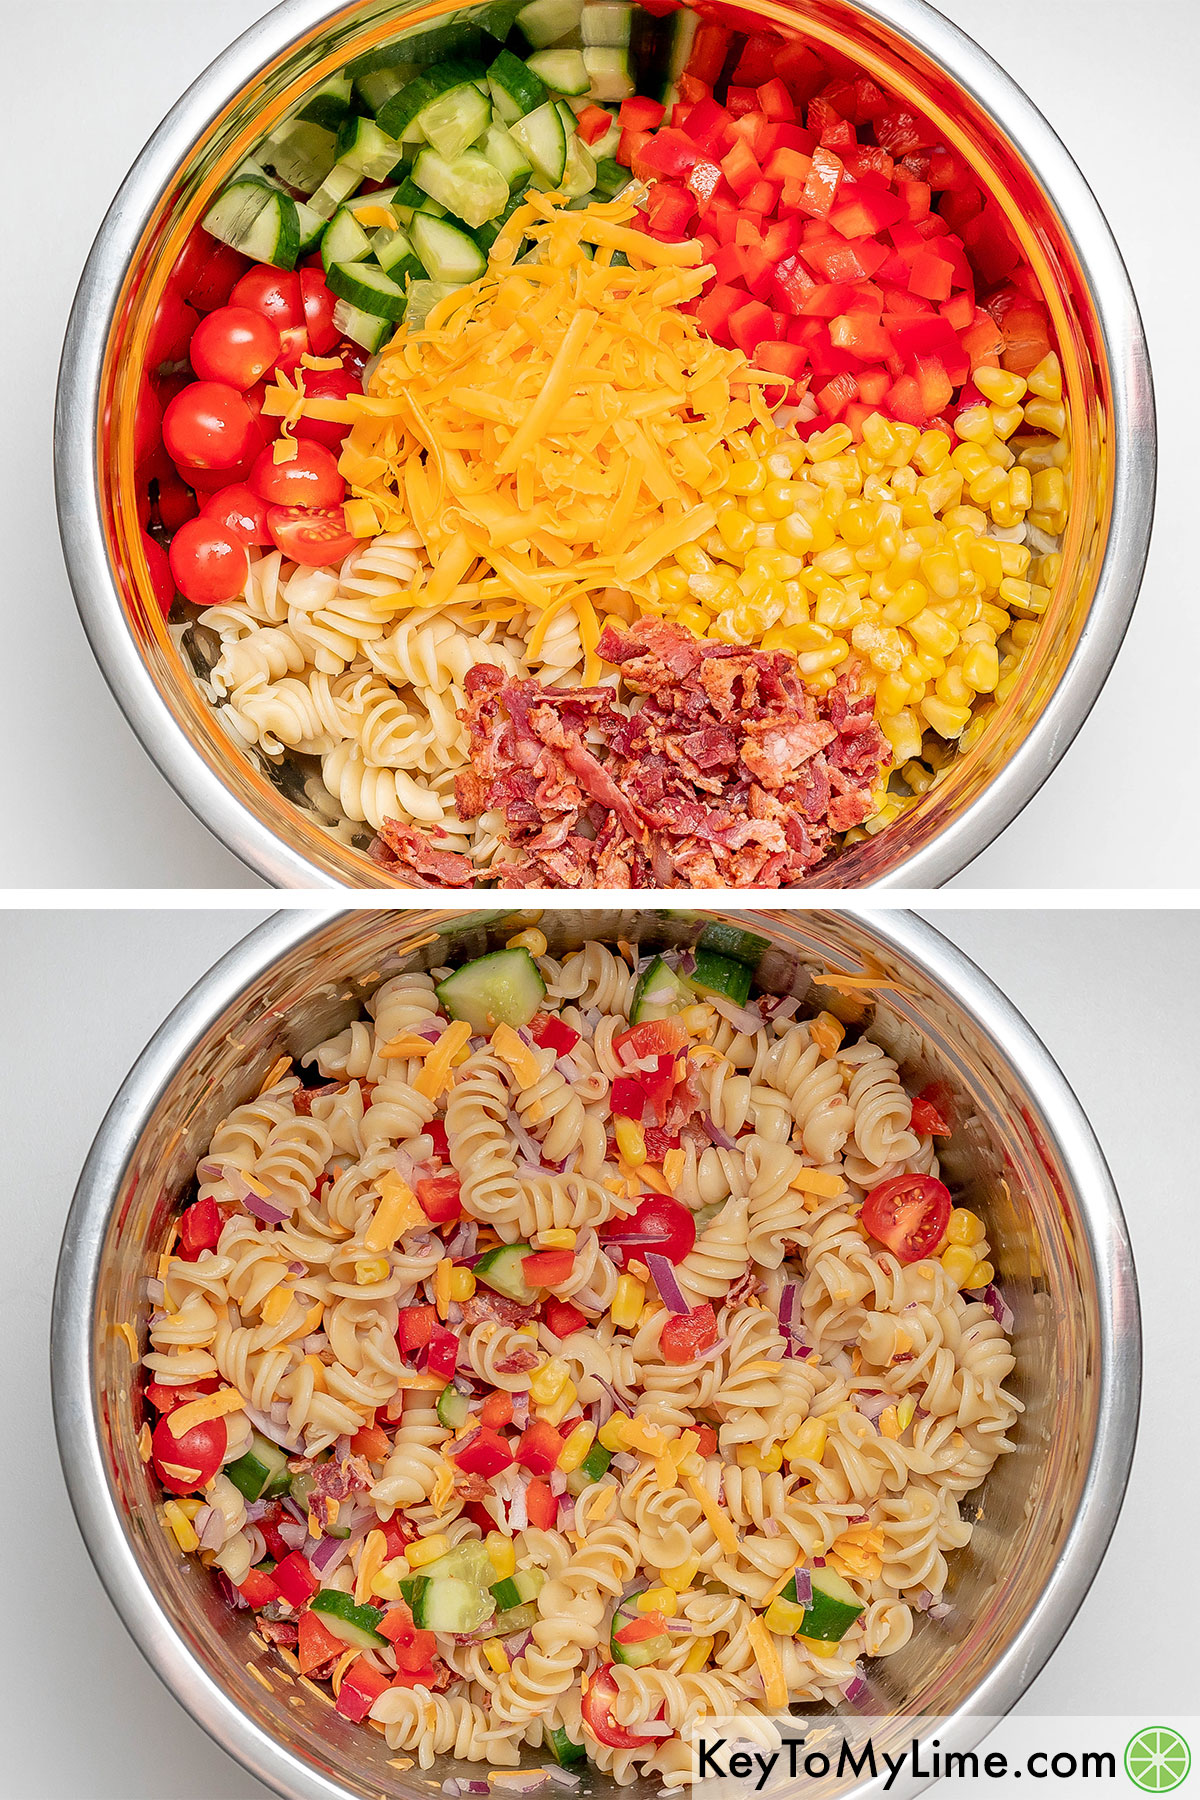 Adding the diced vegetables, cheese and cooked rotini pasta to a large mixing bowl and mixing together.